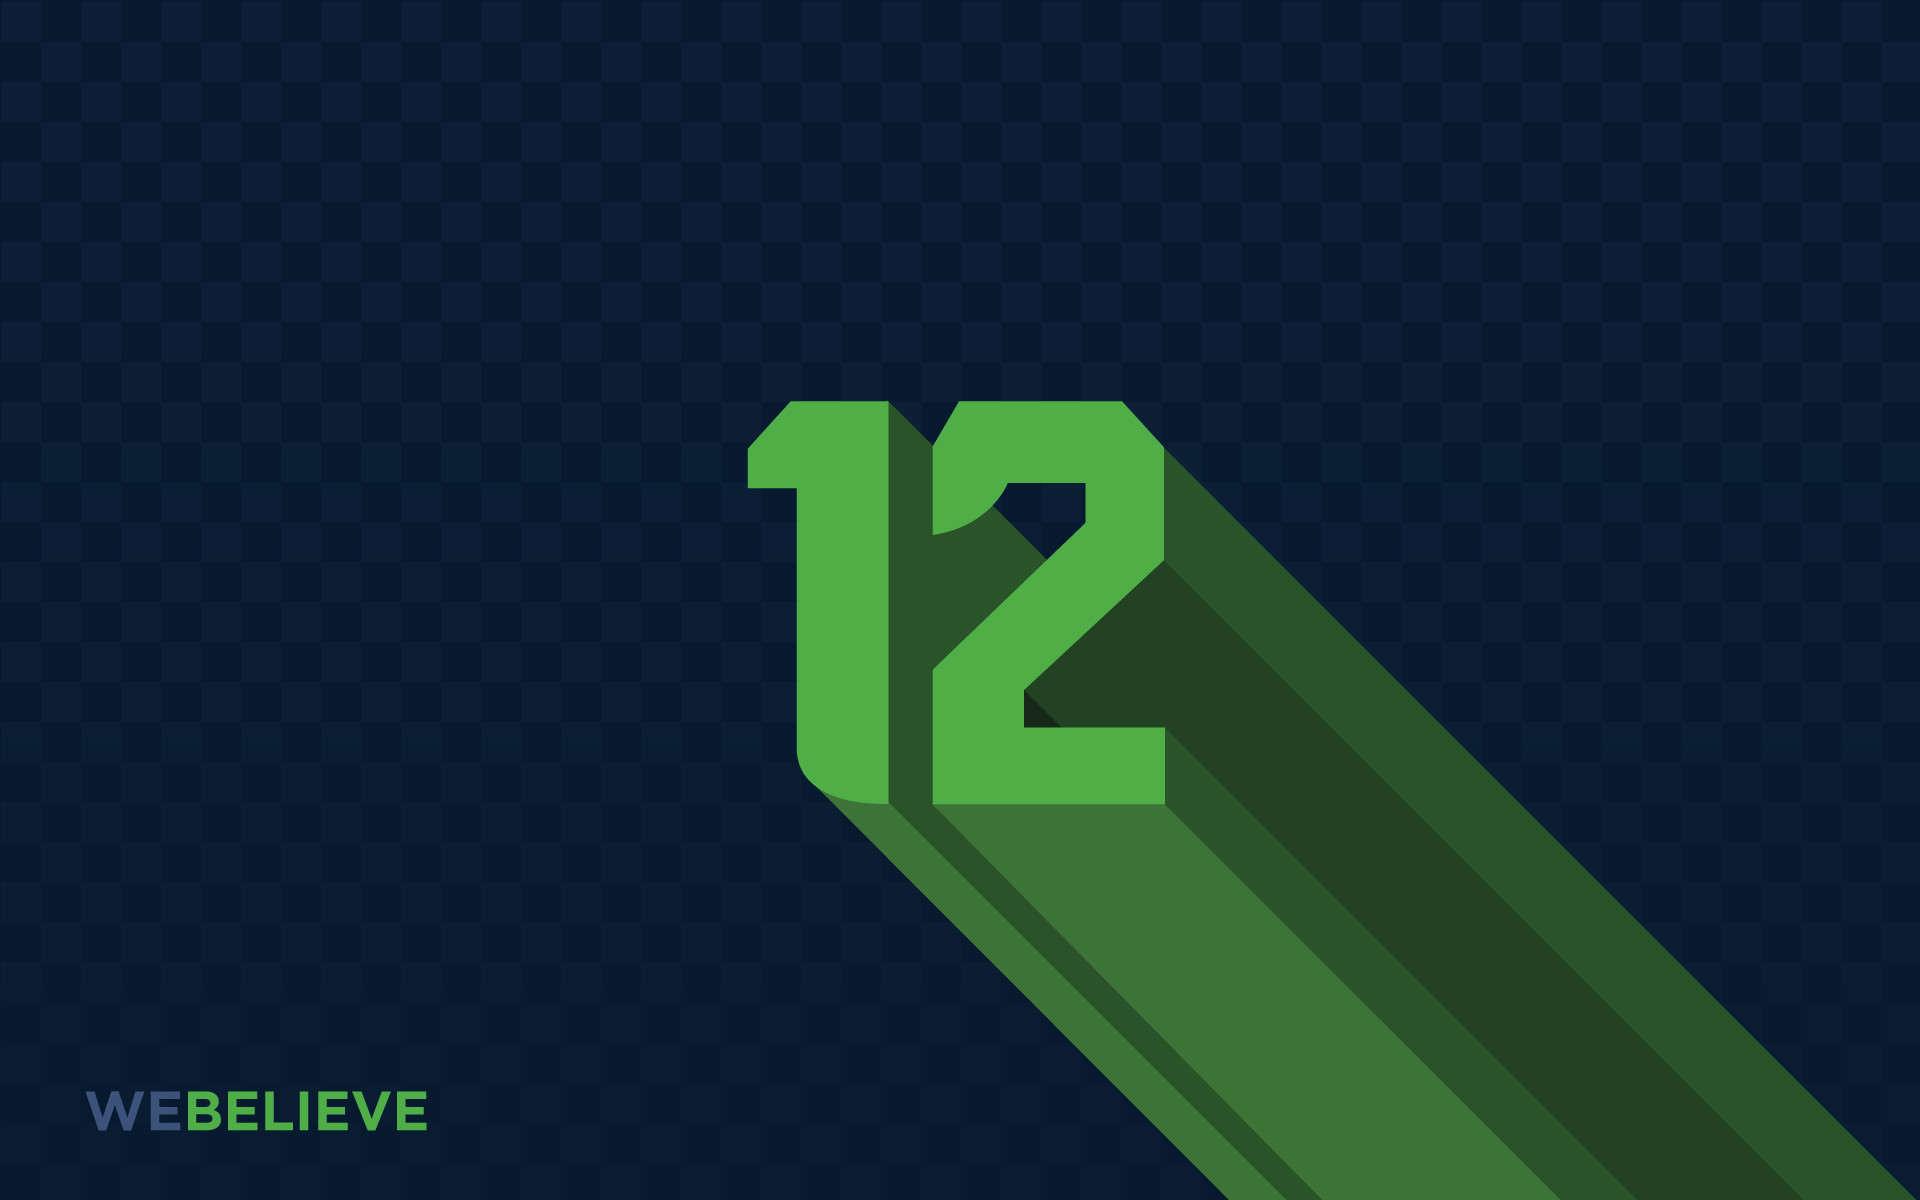 1920x1200 Seattle Seahawks Iphone 5 Wallpaper 12th man wallpapers